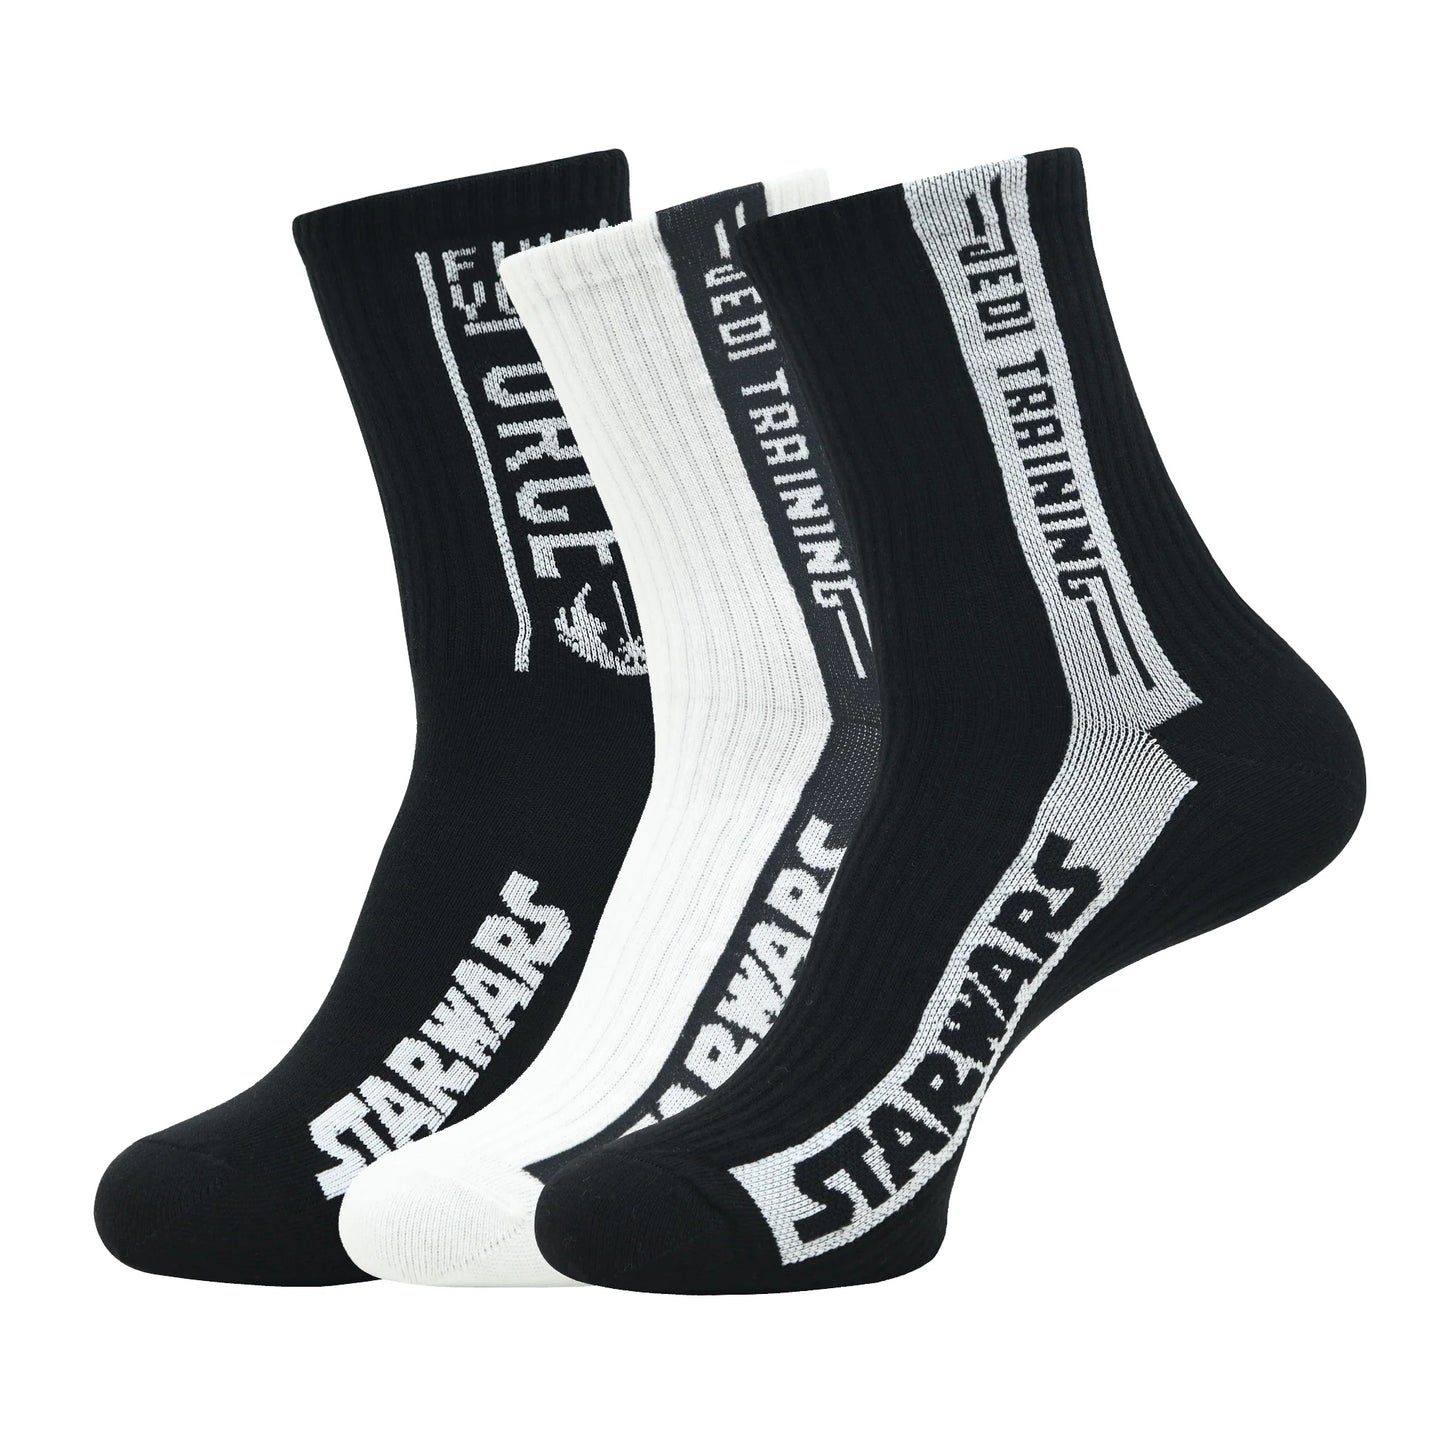 STAR WARS GIFT PACK FOR MEN- CLASSIC BLACK & WHITE - JEDI TRAINING AND FIND YOUR FORCE-HIGH ANKLE SOCKS (PACK OF 3 PAIRS/1U) Balenzia